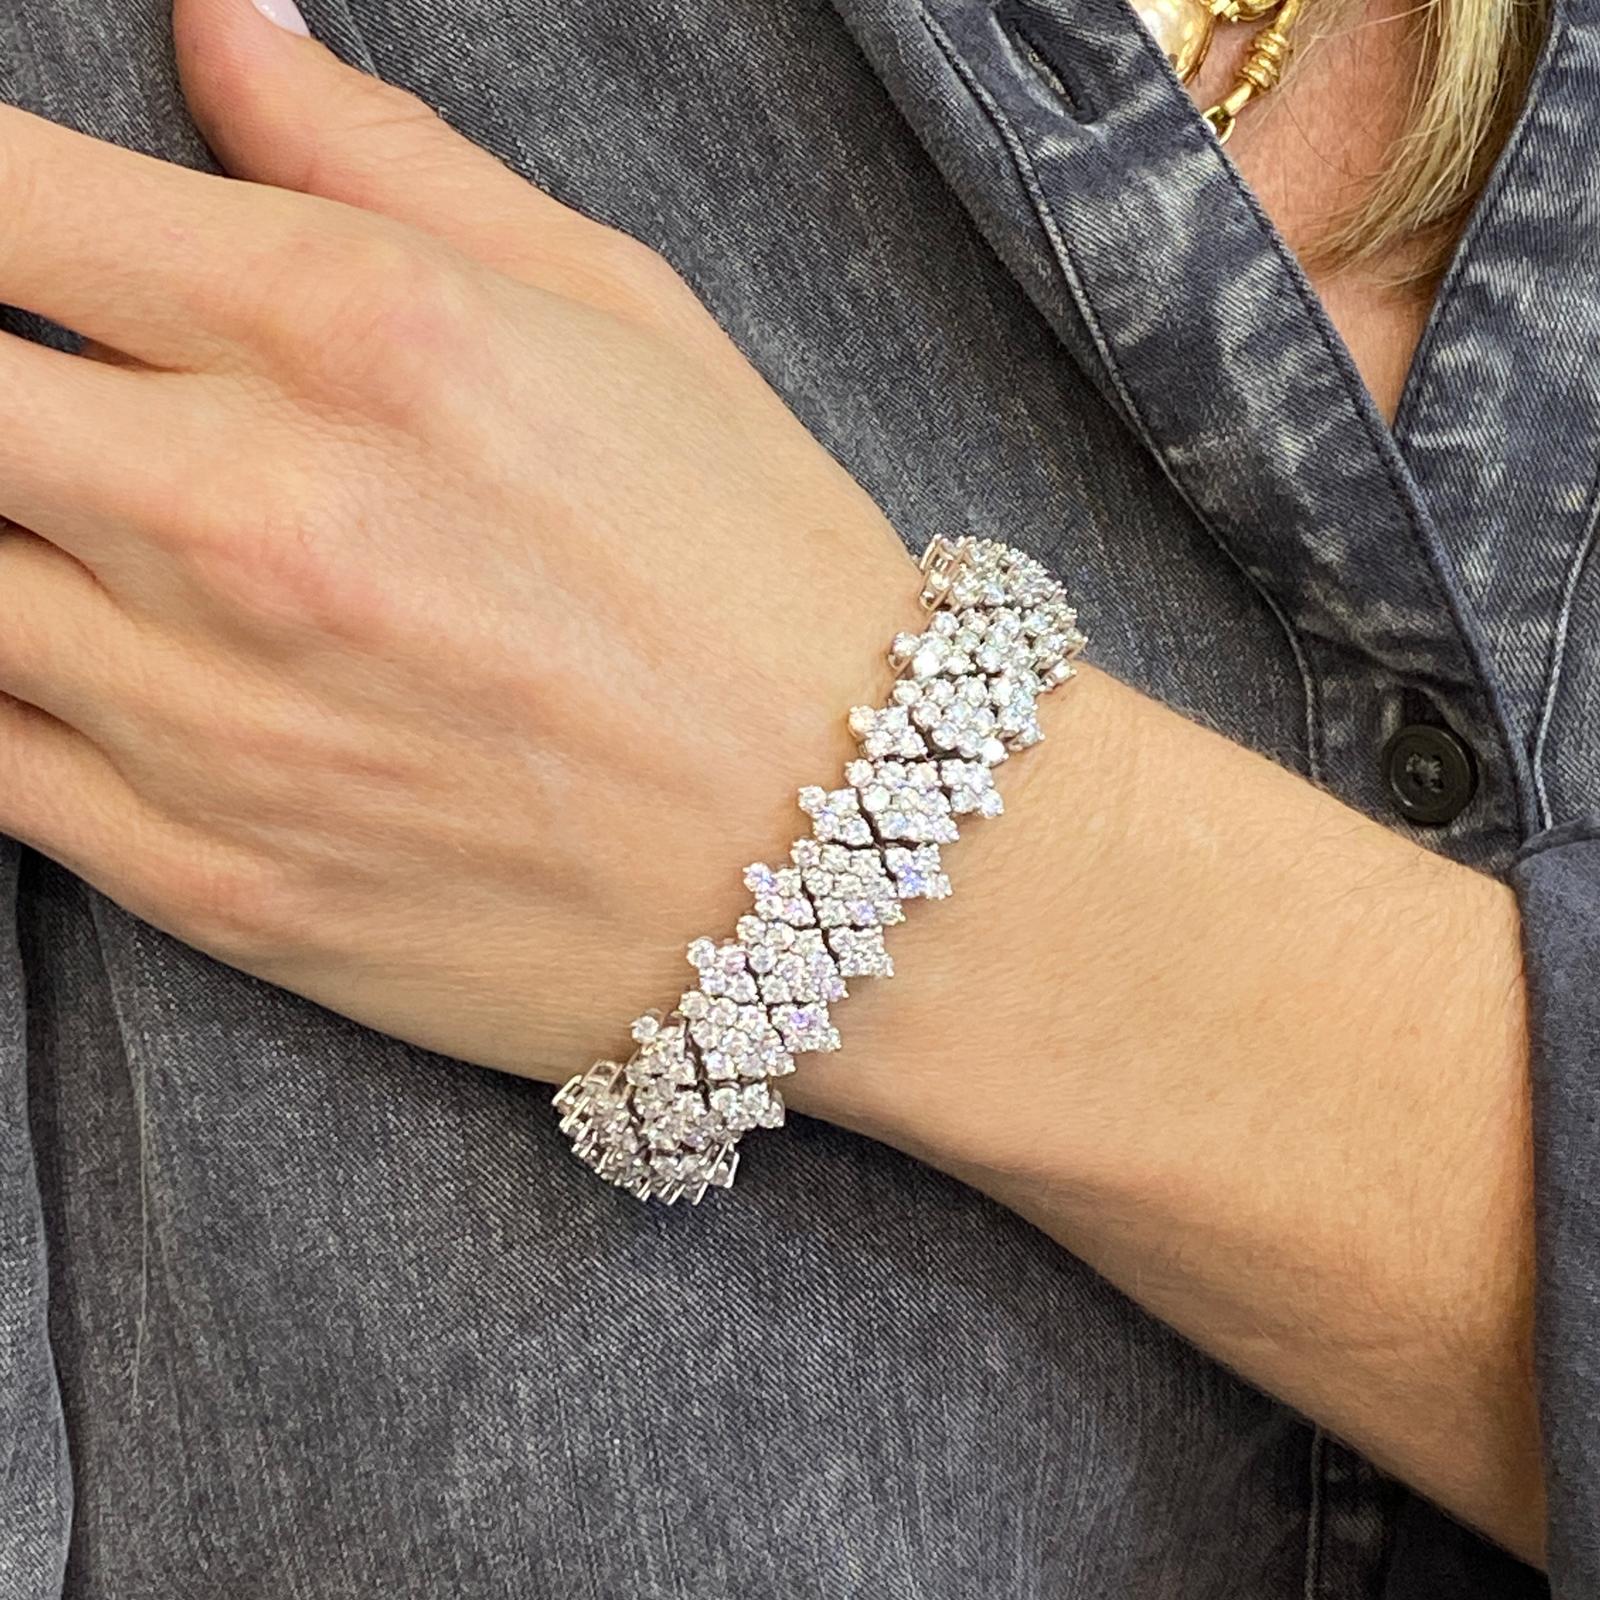 Beautifully crafted diamond bracelet fashioned in platinum. The bracelet features 340 high quality round brilliant cut diamonds weighing 24 carat total weight. The diamonds are graded G-H color and VS clarity. The flexible links with hidden clasp